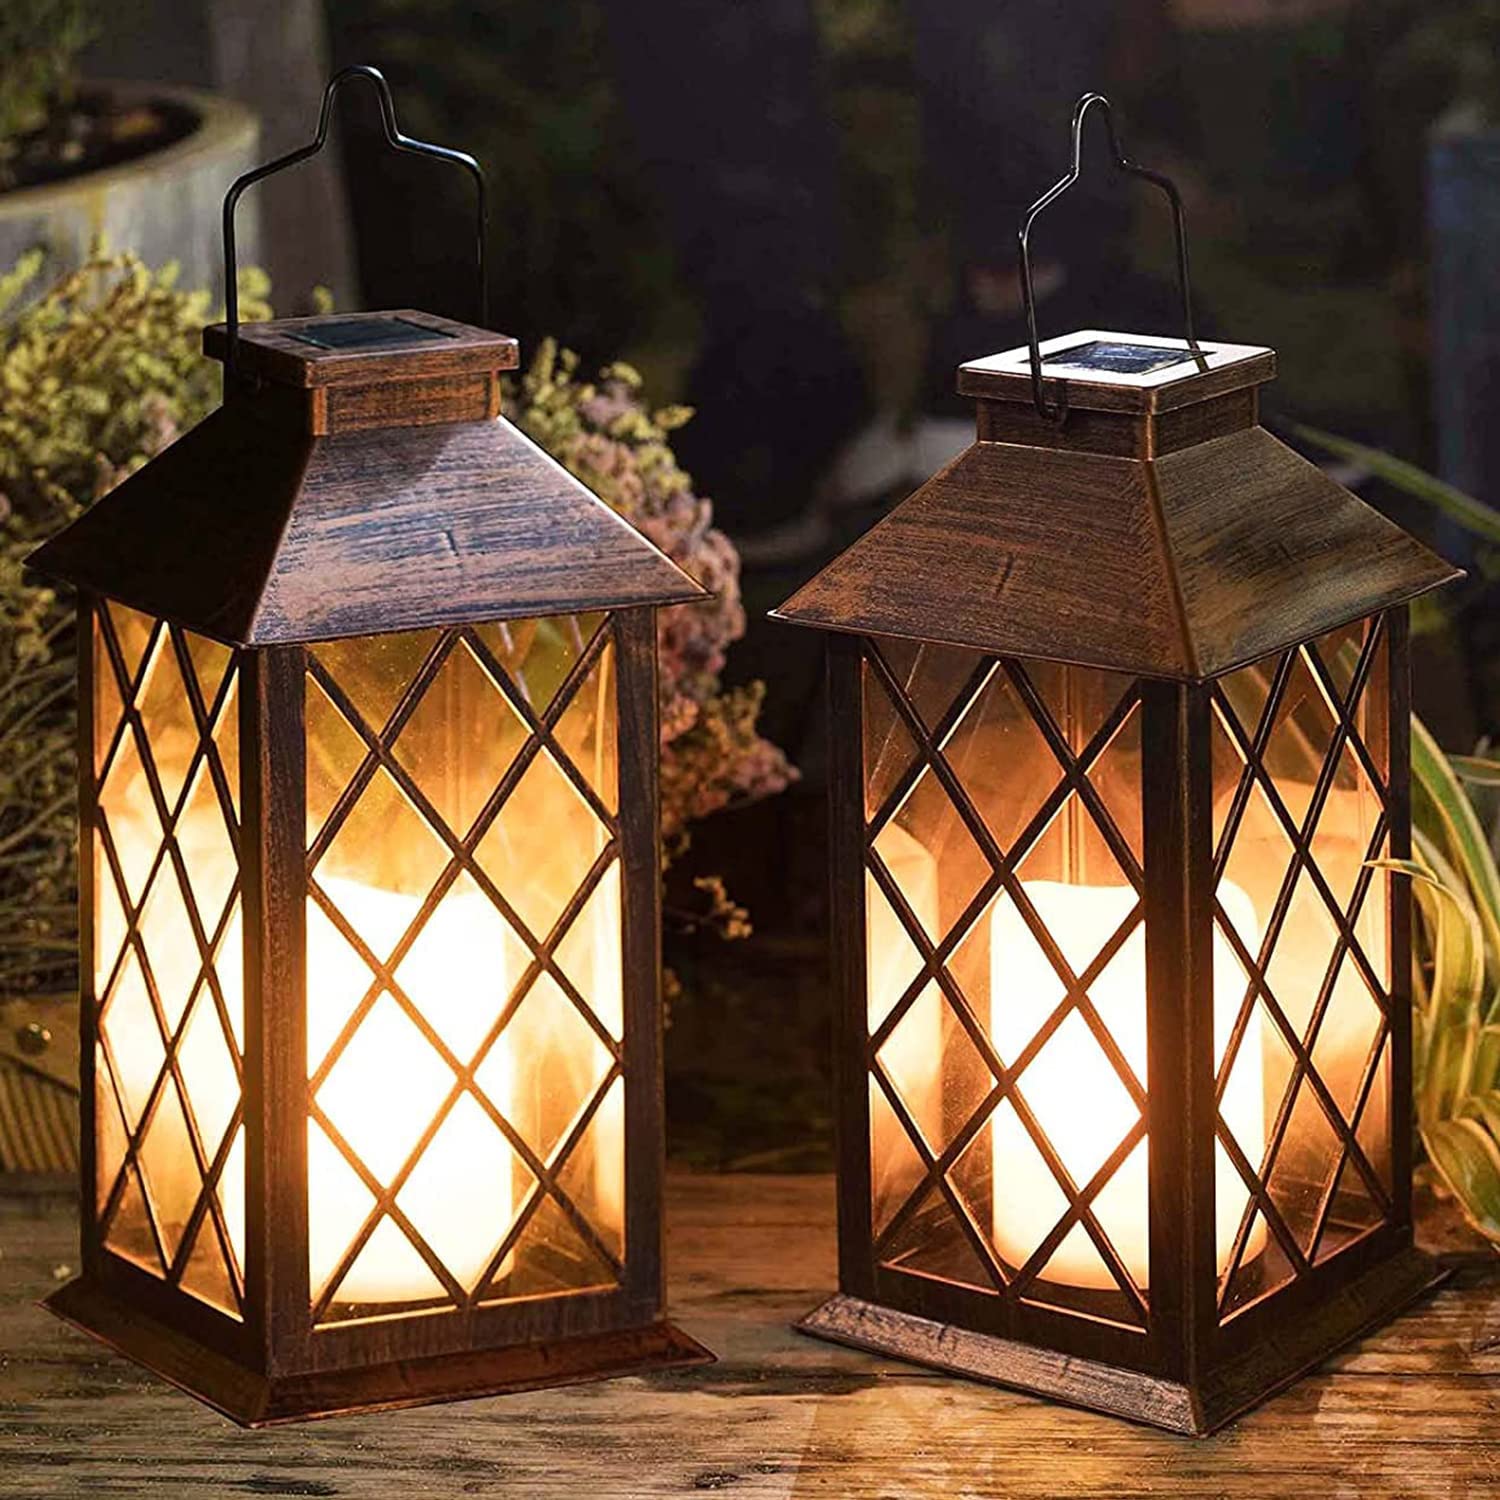 TAKE ME [2 Pack] 14" Solar Lantern Outdoor Garden Hanging Lantern Waterproof LED Flickering Flameless Candle Mission Lights for Table,Outdoor,Party Valentine's Day Gift
